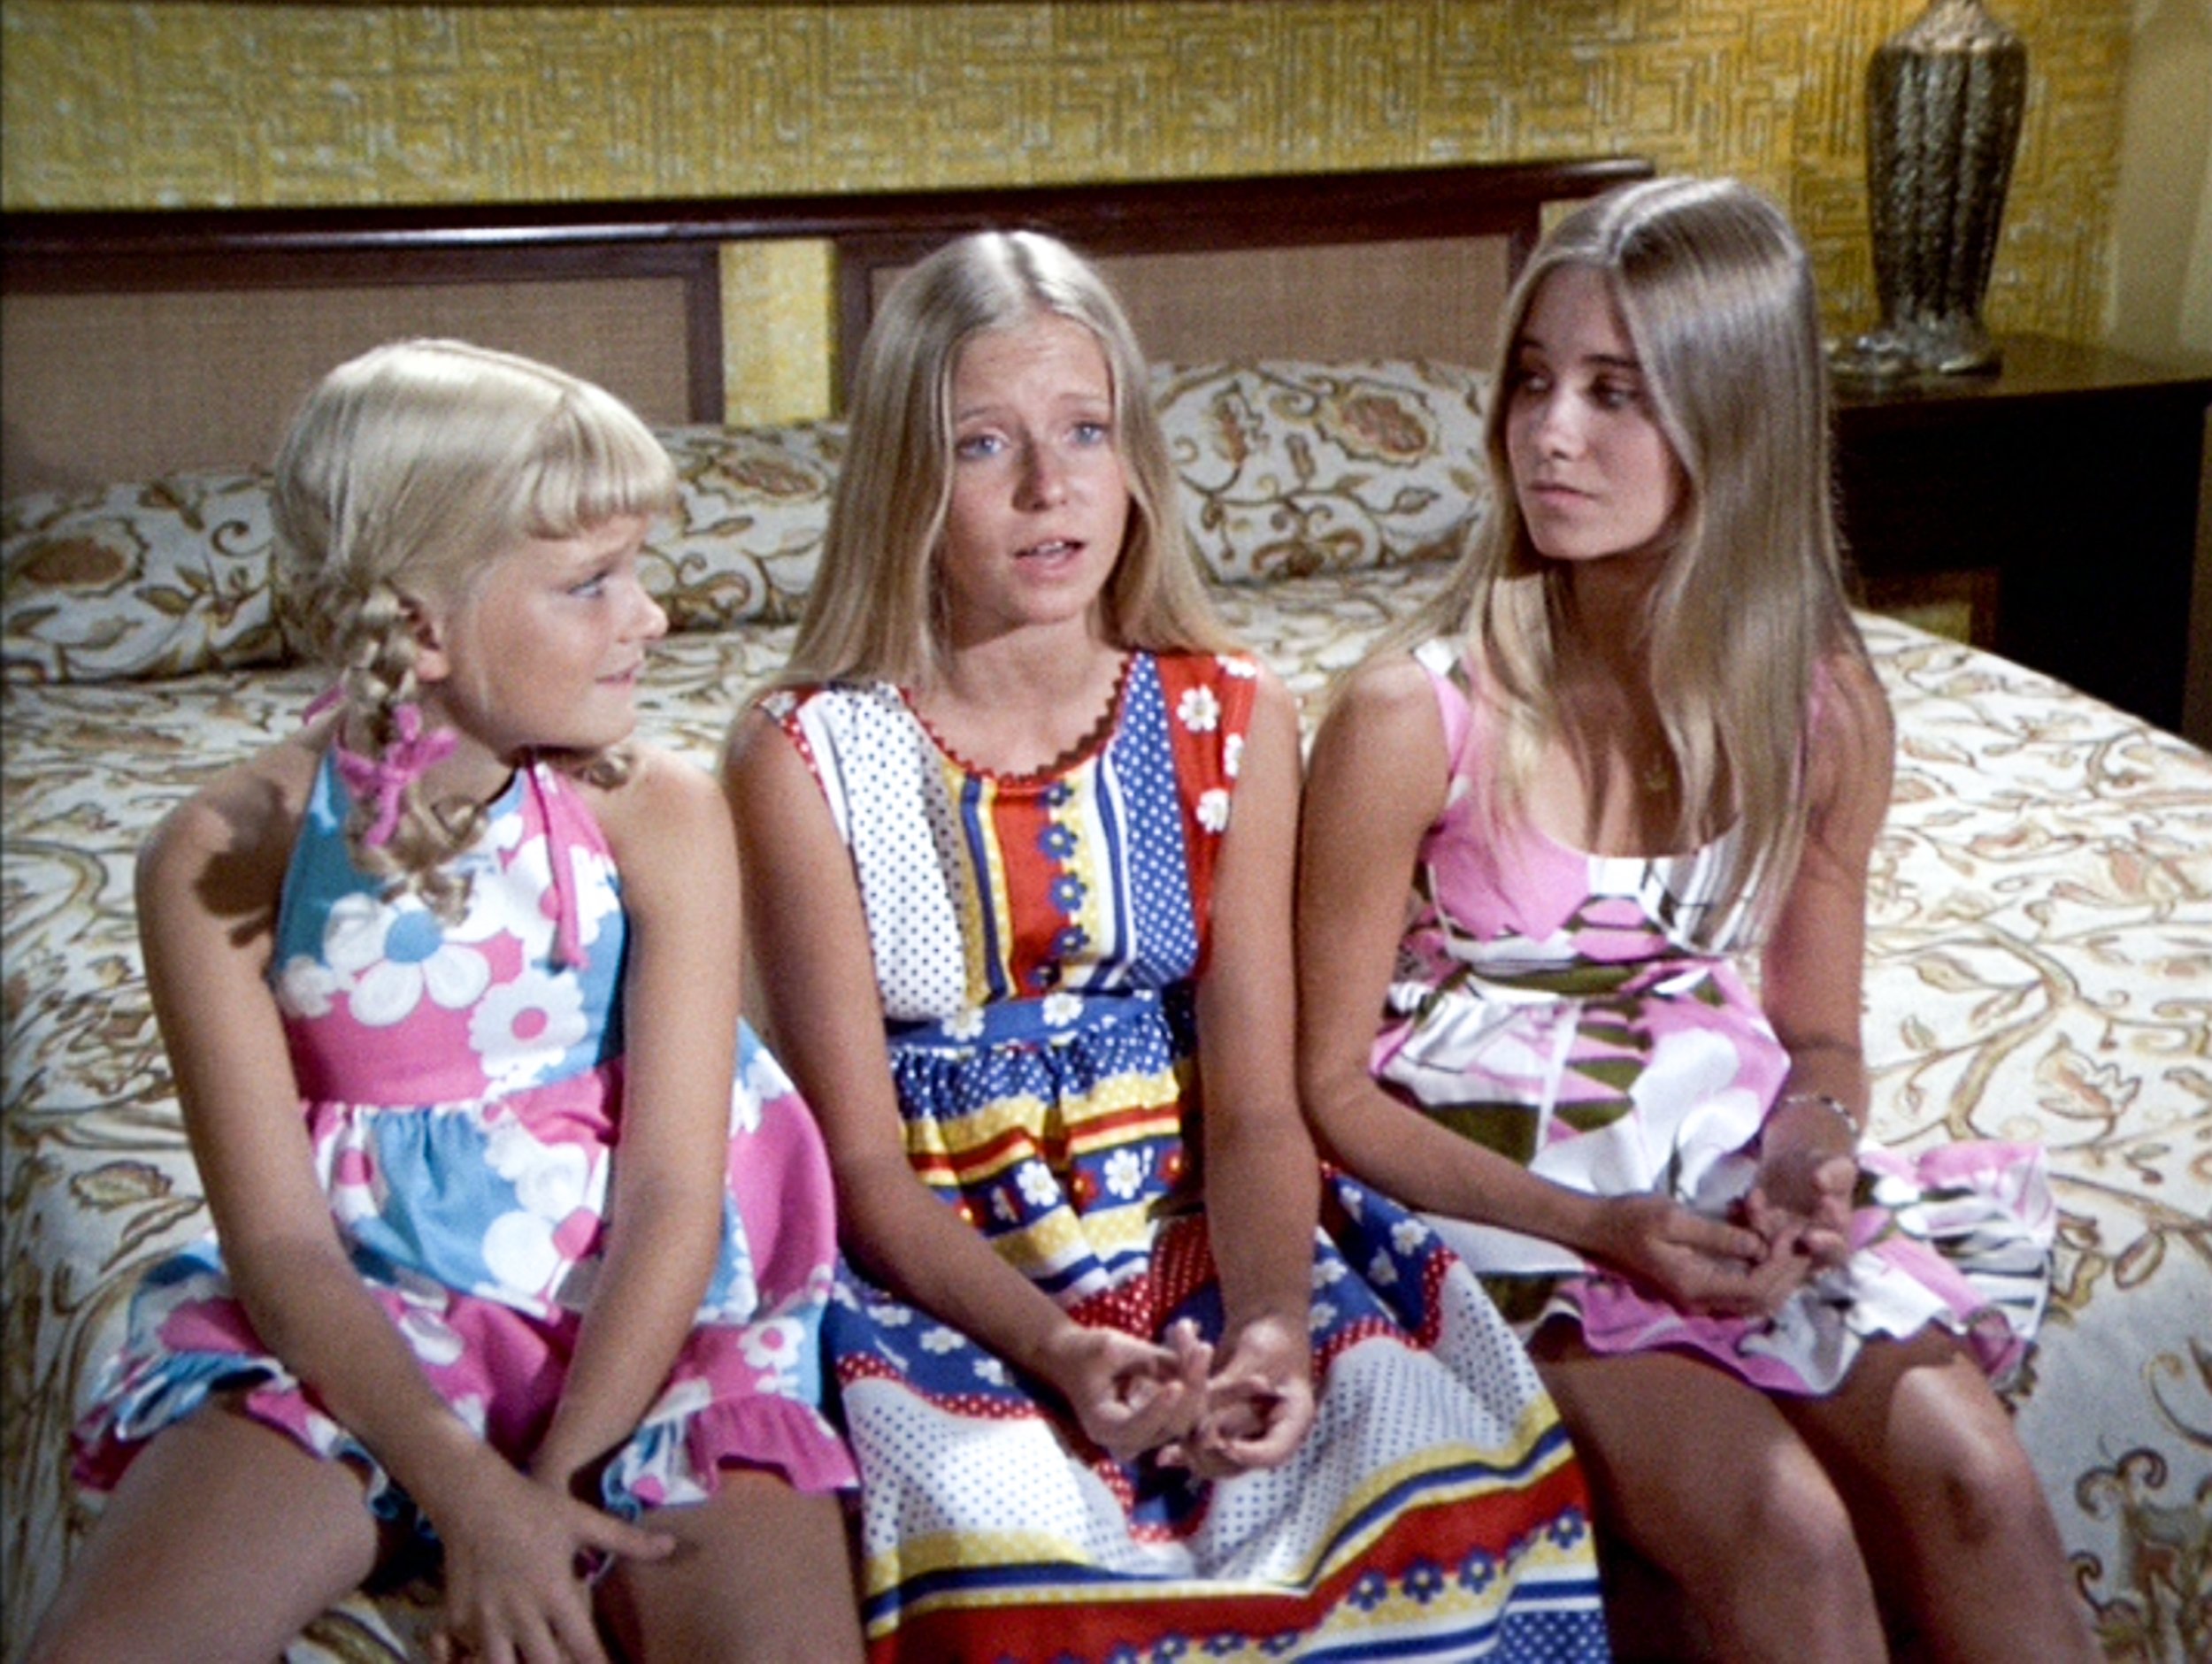 Susan Olsen, Eve Plumb, and Maureen McCormick on a bed in a scene from The Brady Bunch